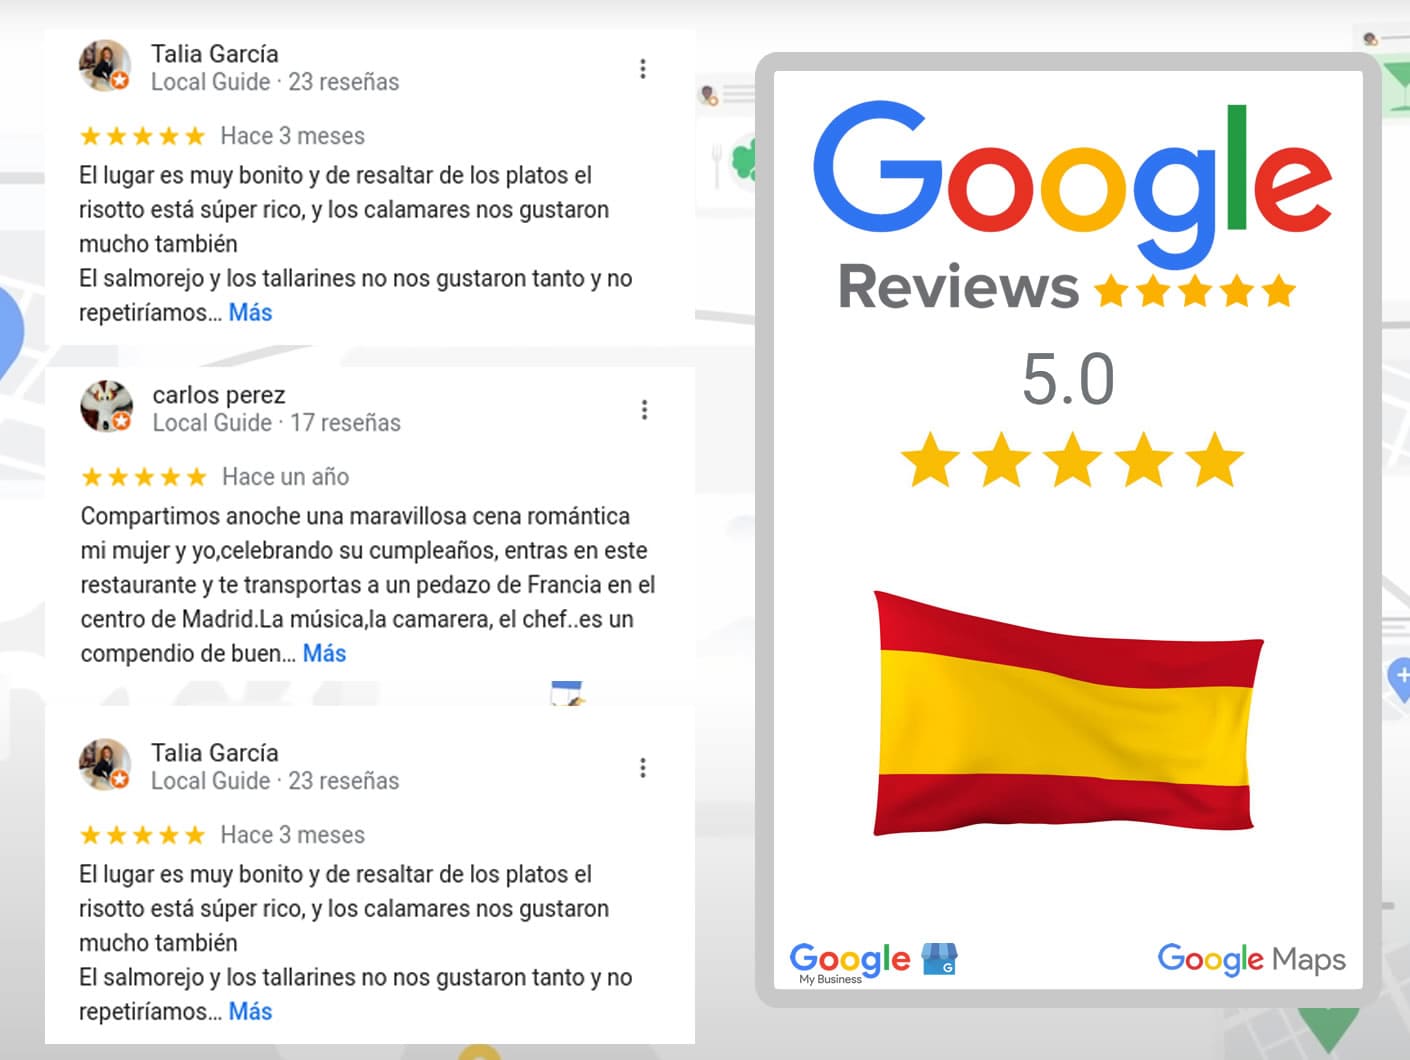 "Buy Google Reviews Spanish" service on the screen.